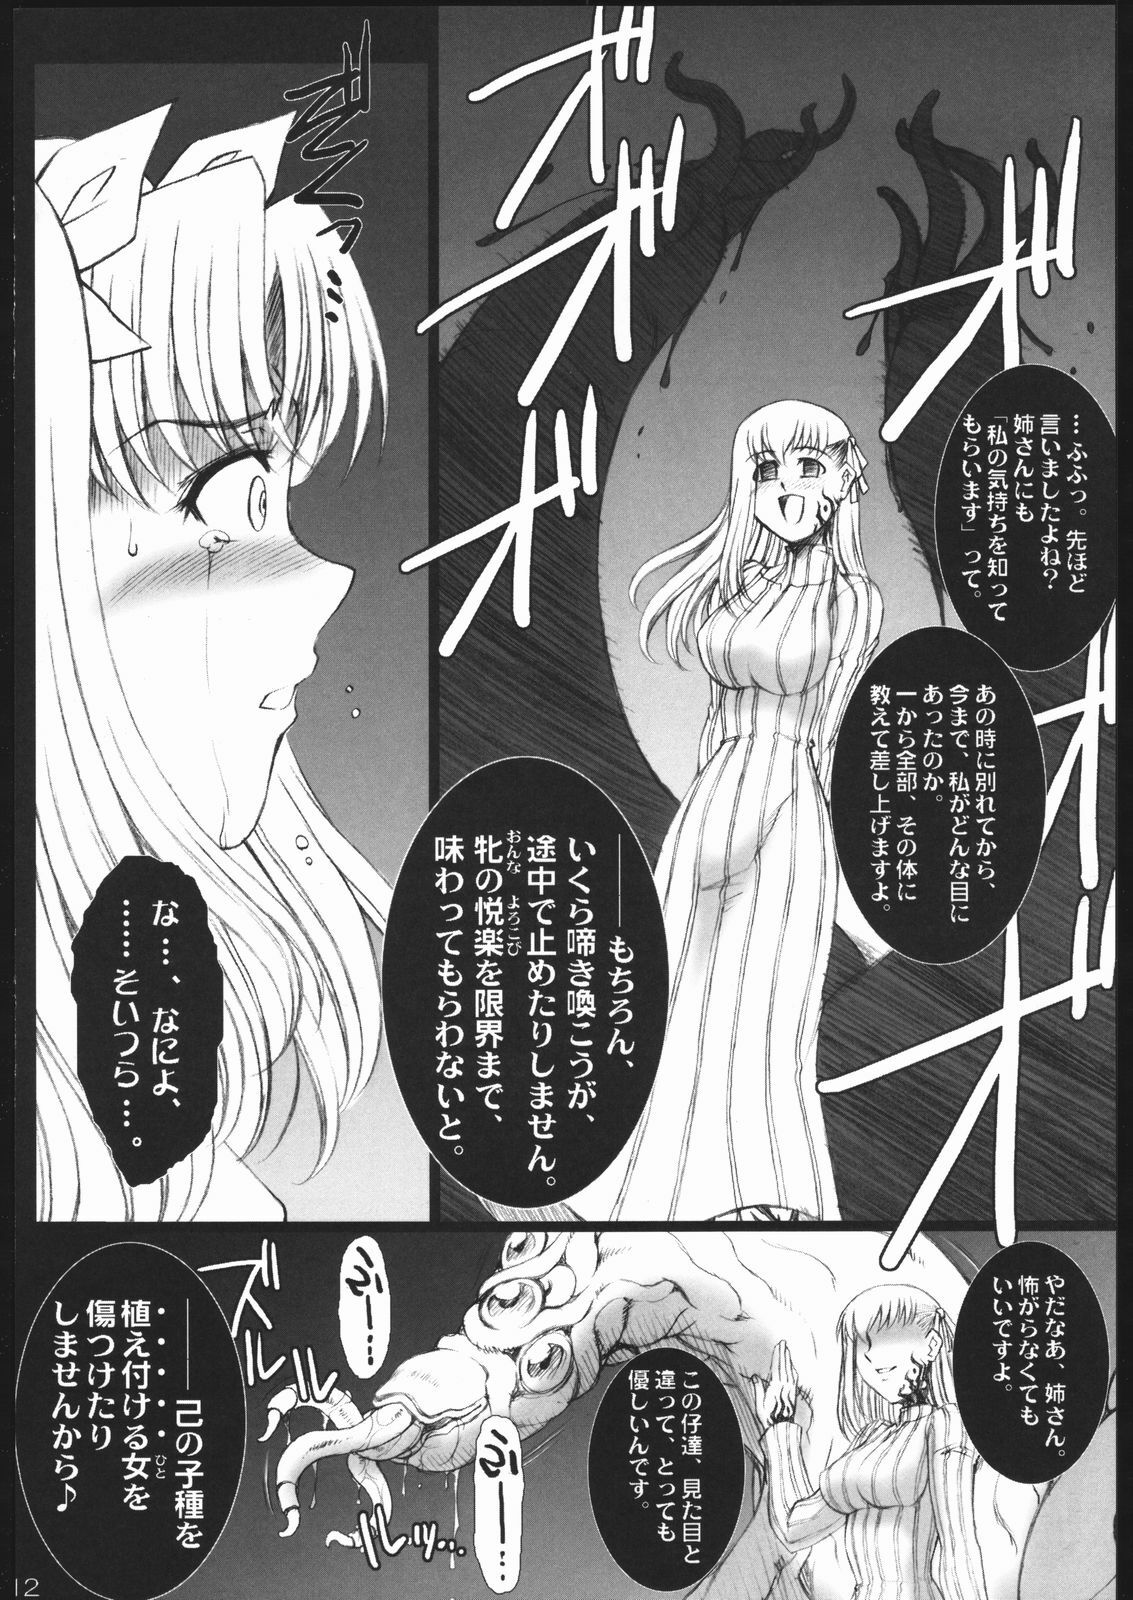 (SC33) [H.B (B-RIVER)] Red Degeneration -DAY/1- (Fate/stay night) page 11 full